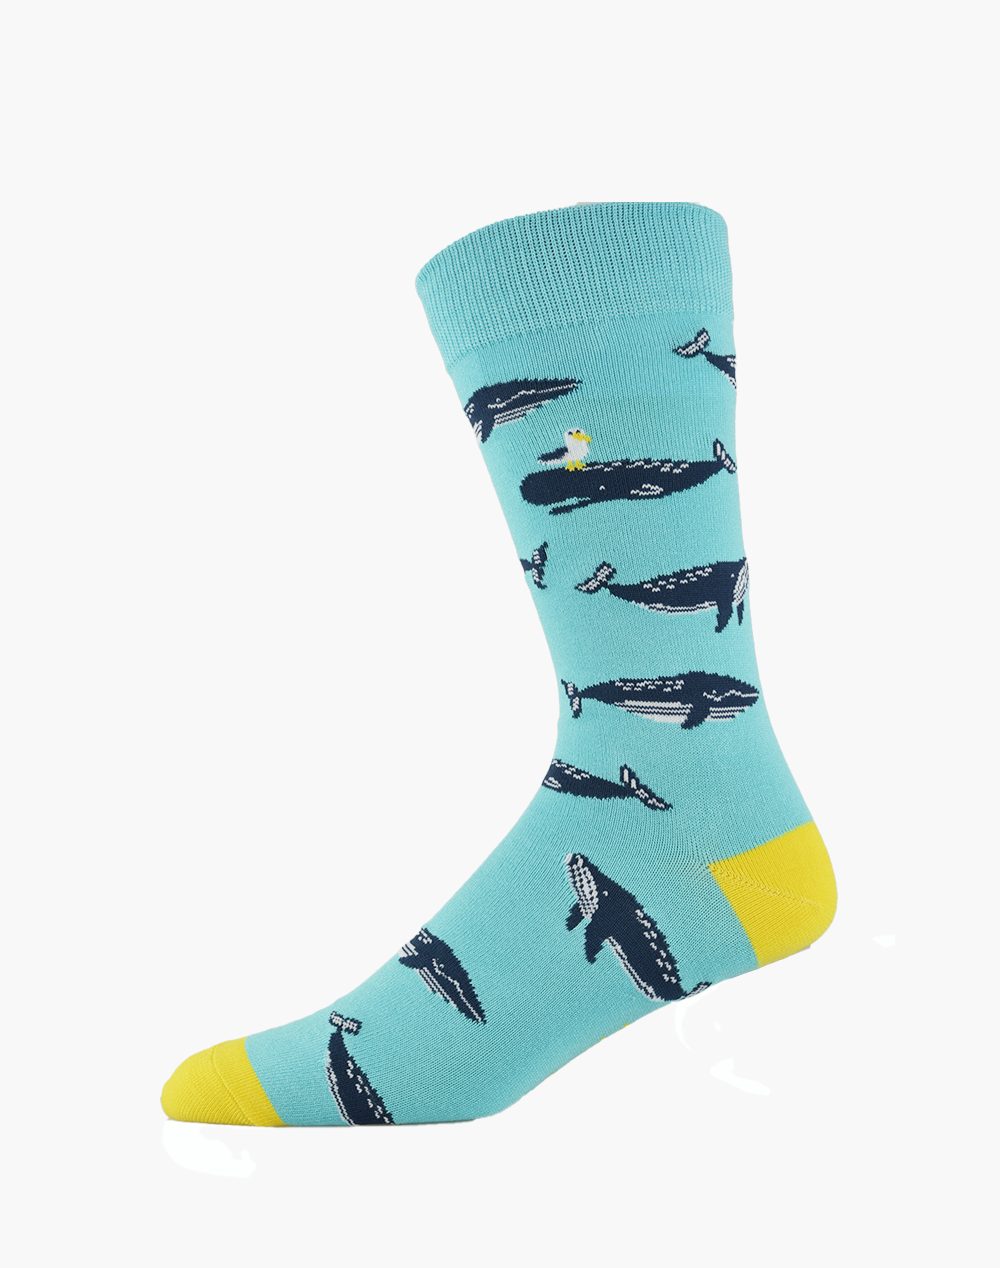 MENS MOBY DICK WHALE BAMBOO SOCK